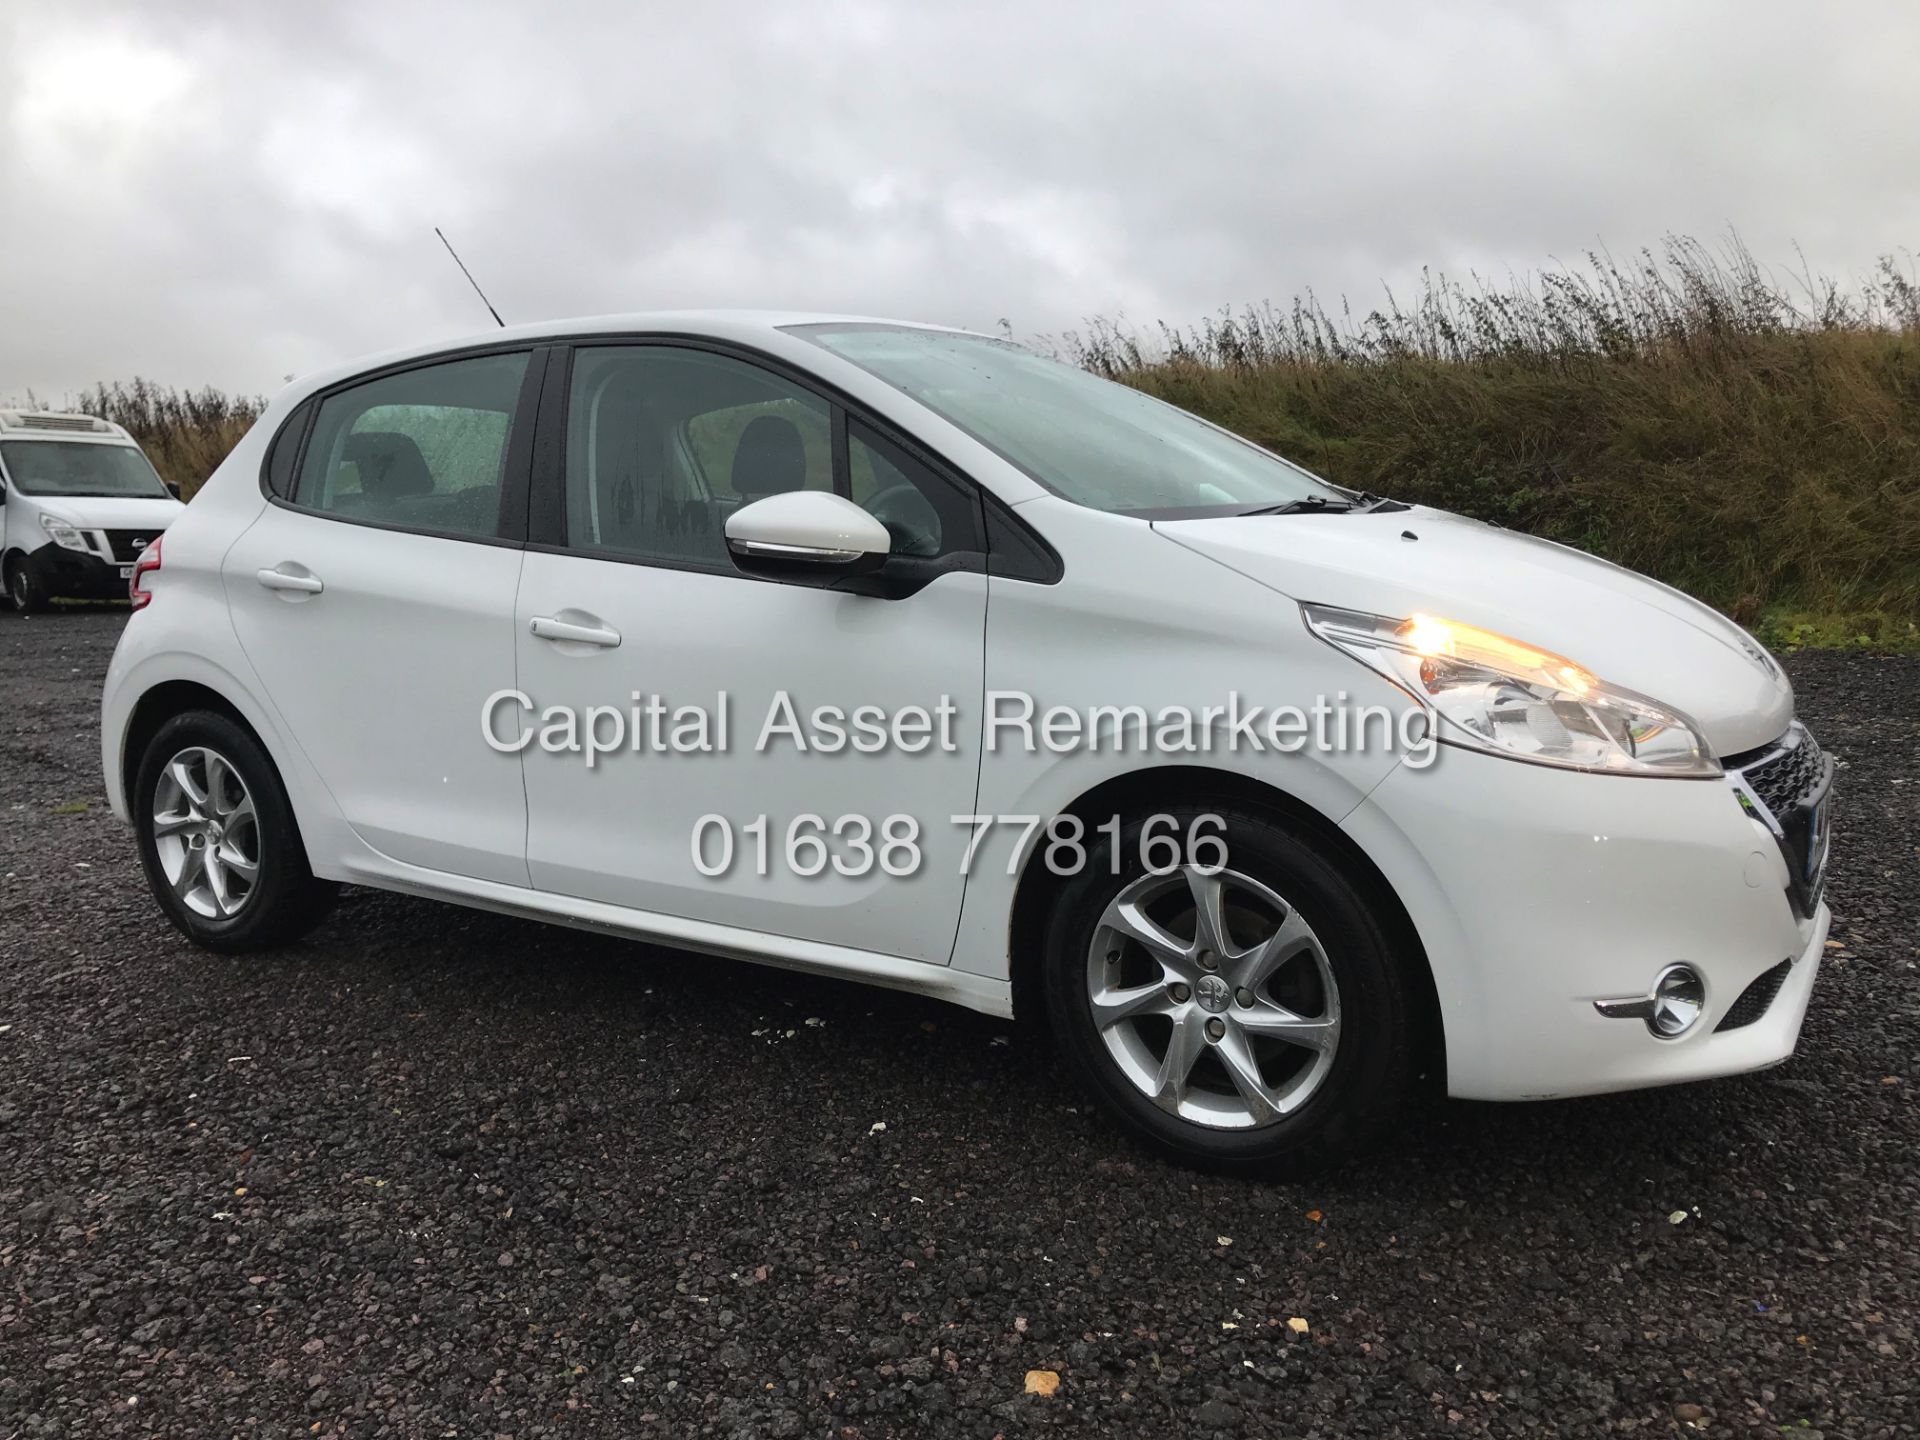 (ON SALE) PEUGEOT 208 1.4HDI "ACTIVE" 1 PREVIOUS KEEPER FSH (14 REG) RECENT SERVICE-AIR CON *NO VAT*